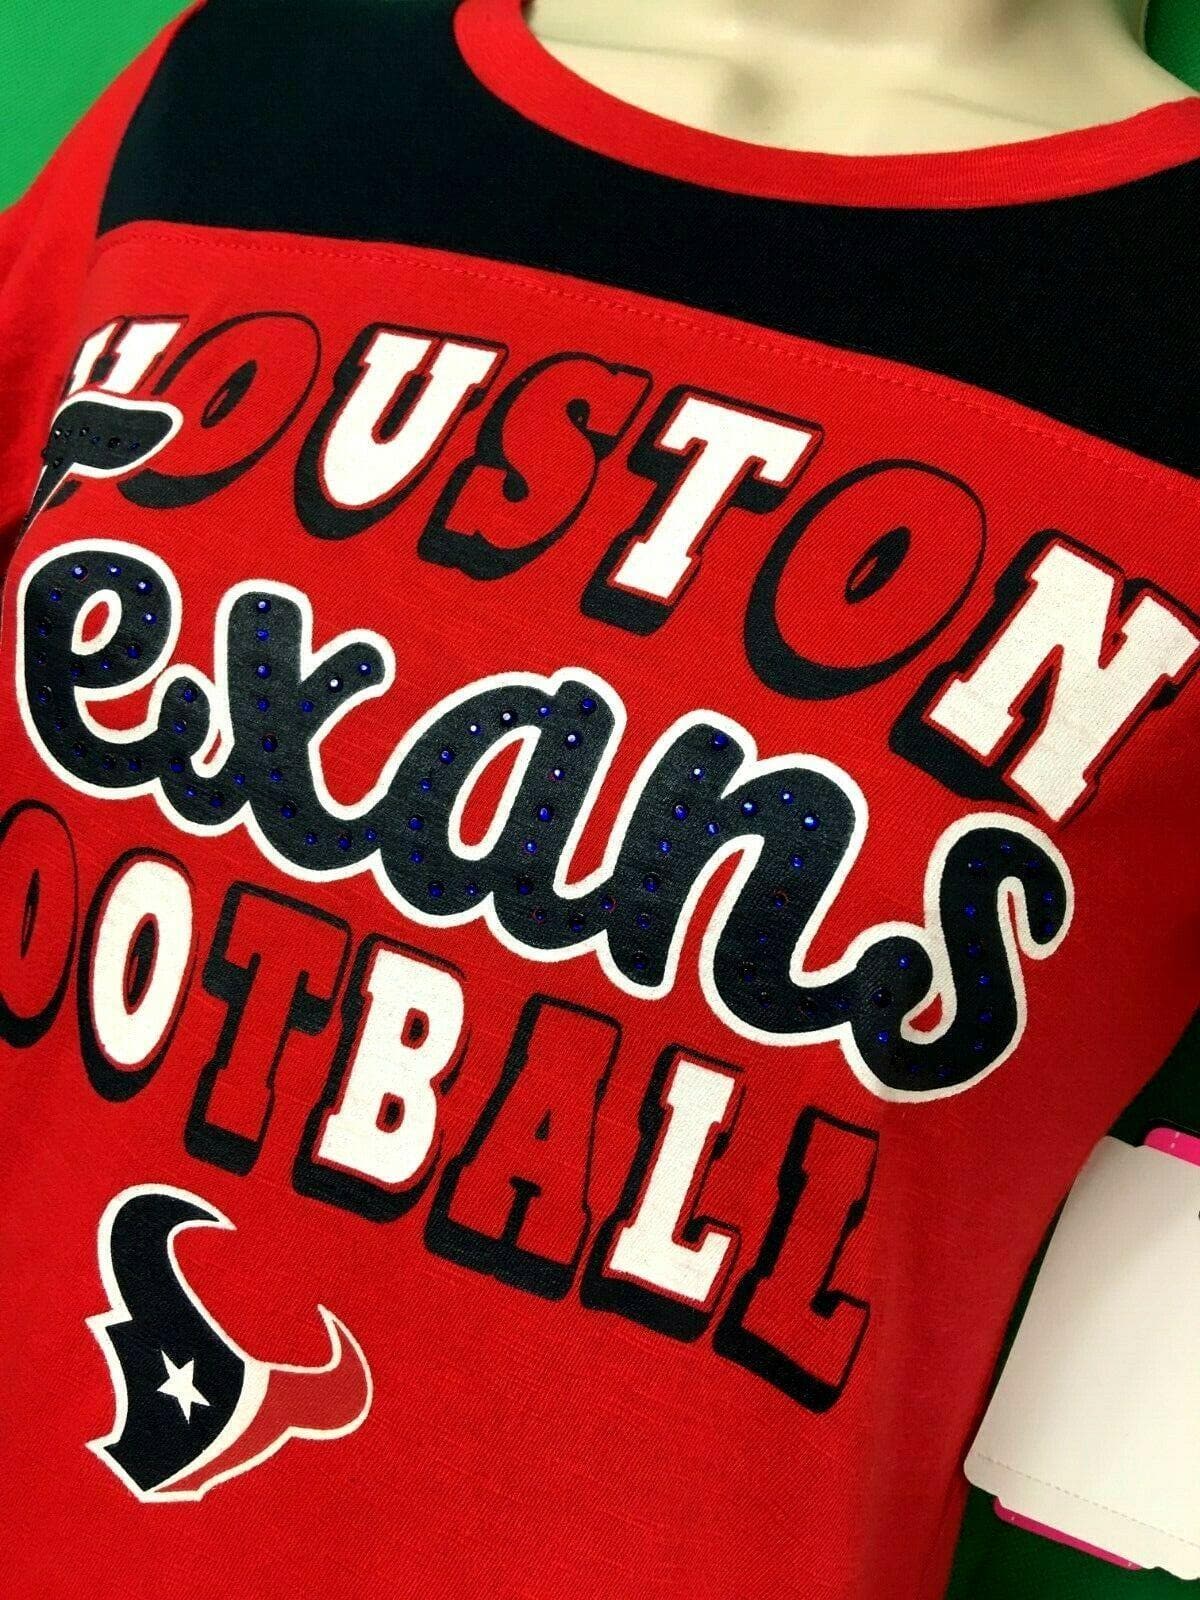 NFL Houston Texans Red L/S Girls' T-Shirt Youth Small 7-8 NWT